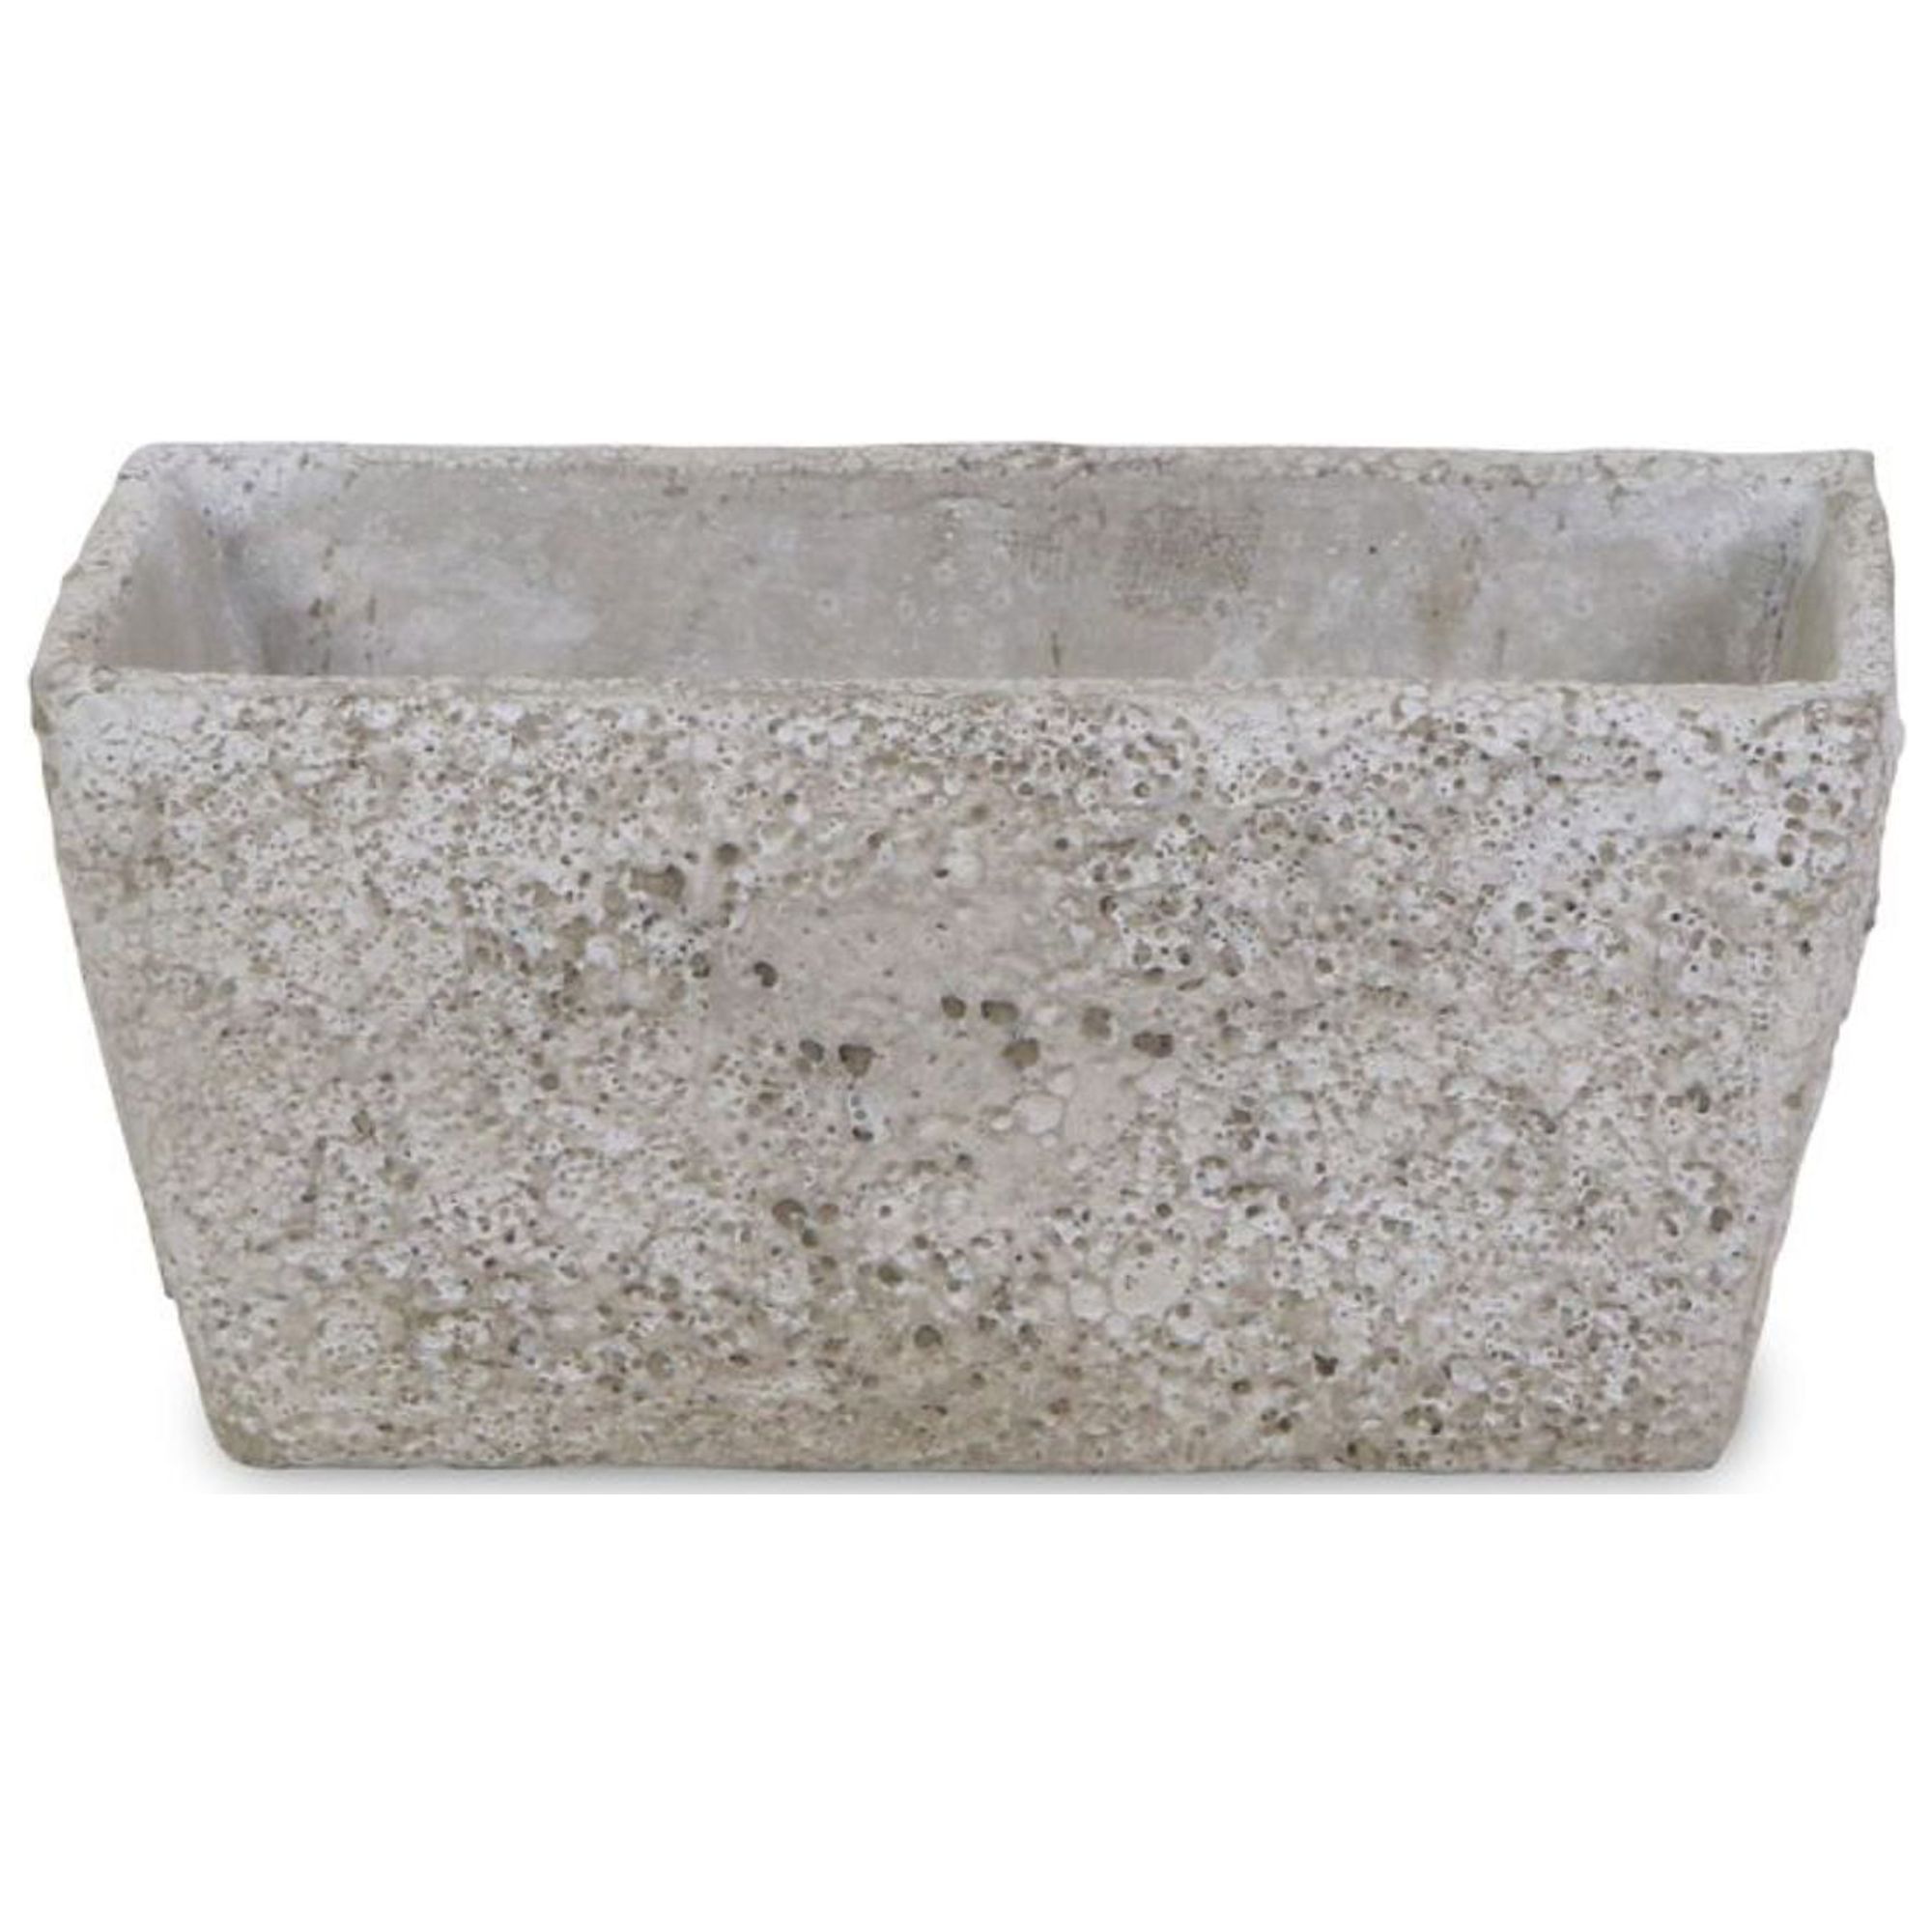 Contemporary Home Living 9.25" Gray Distressed Finish Rectangular Hollow Planter Pot - image 1 of 4